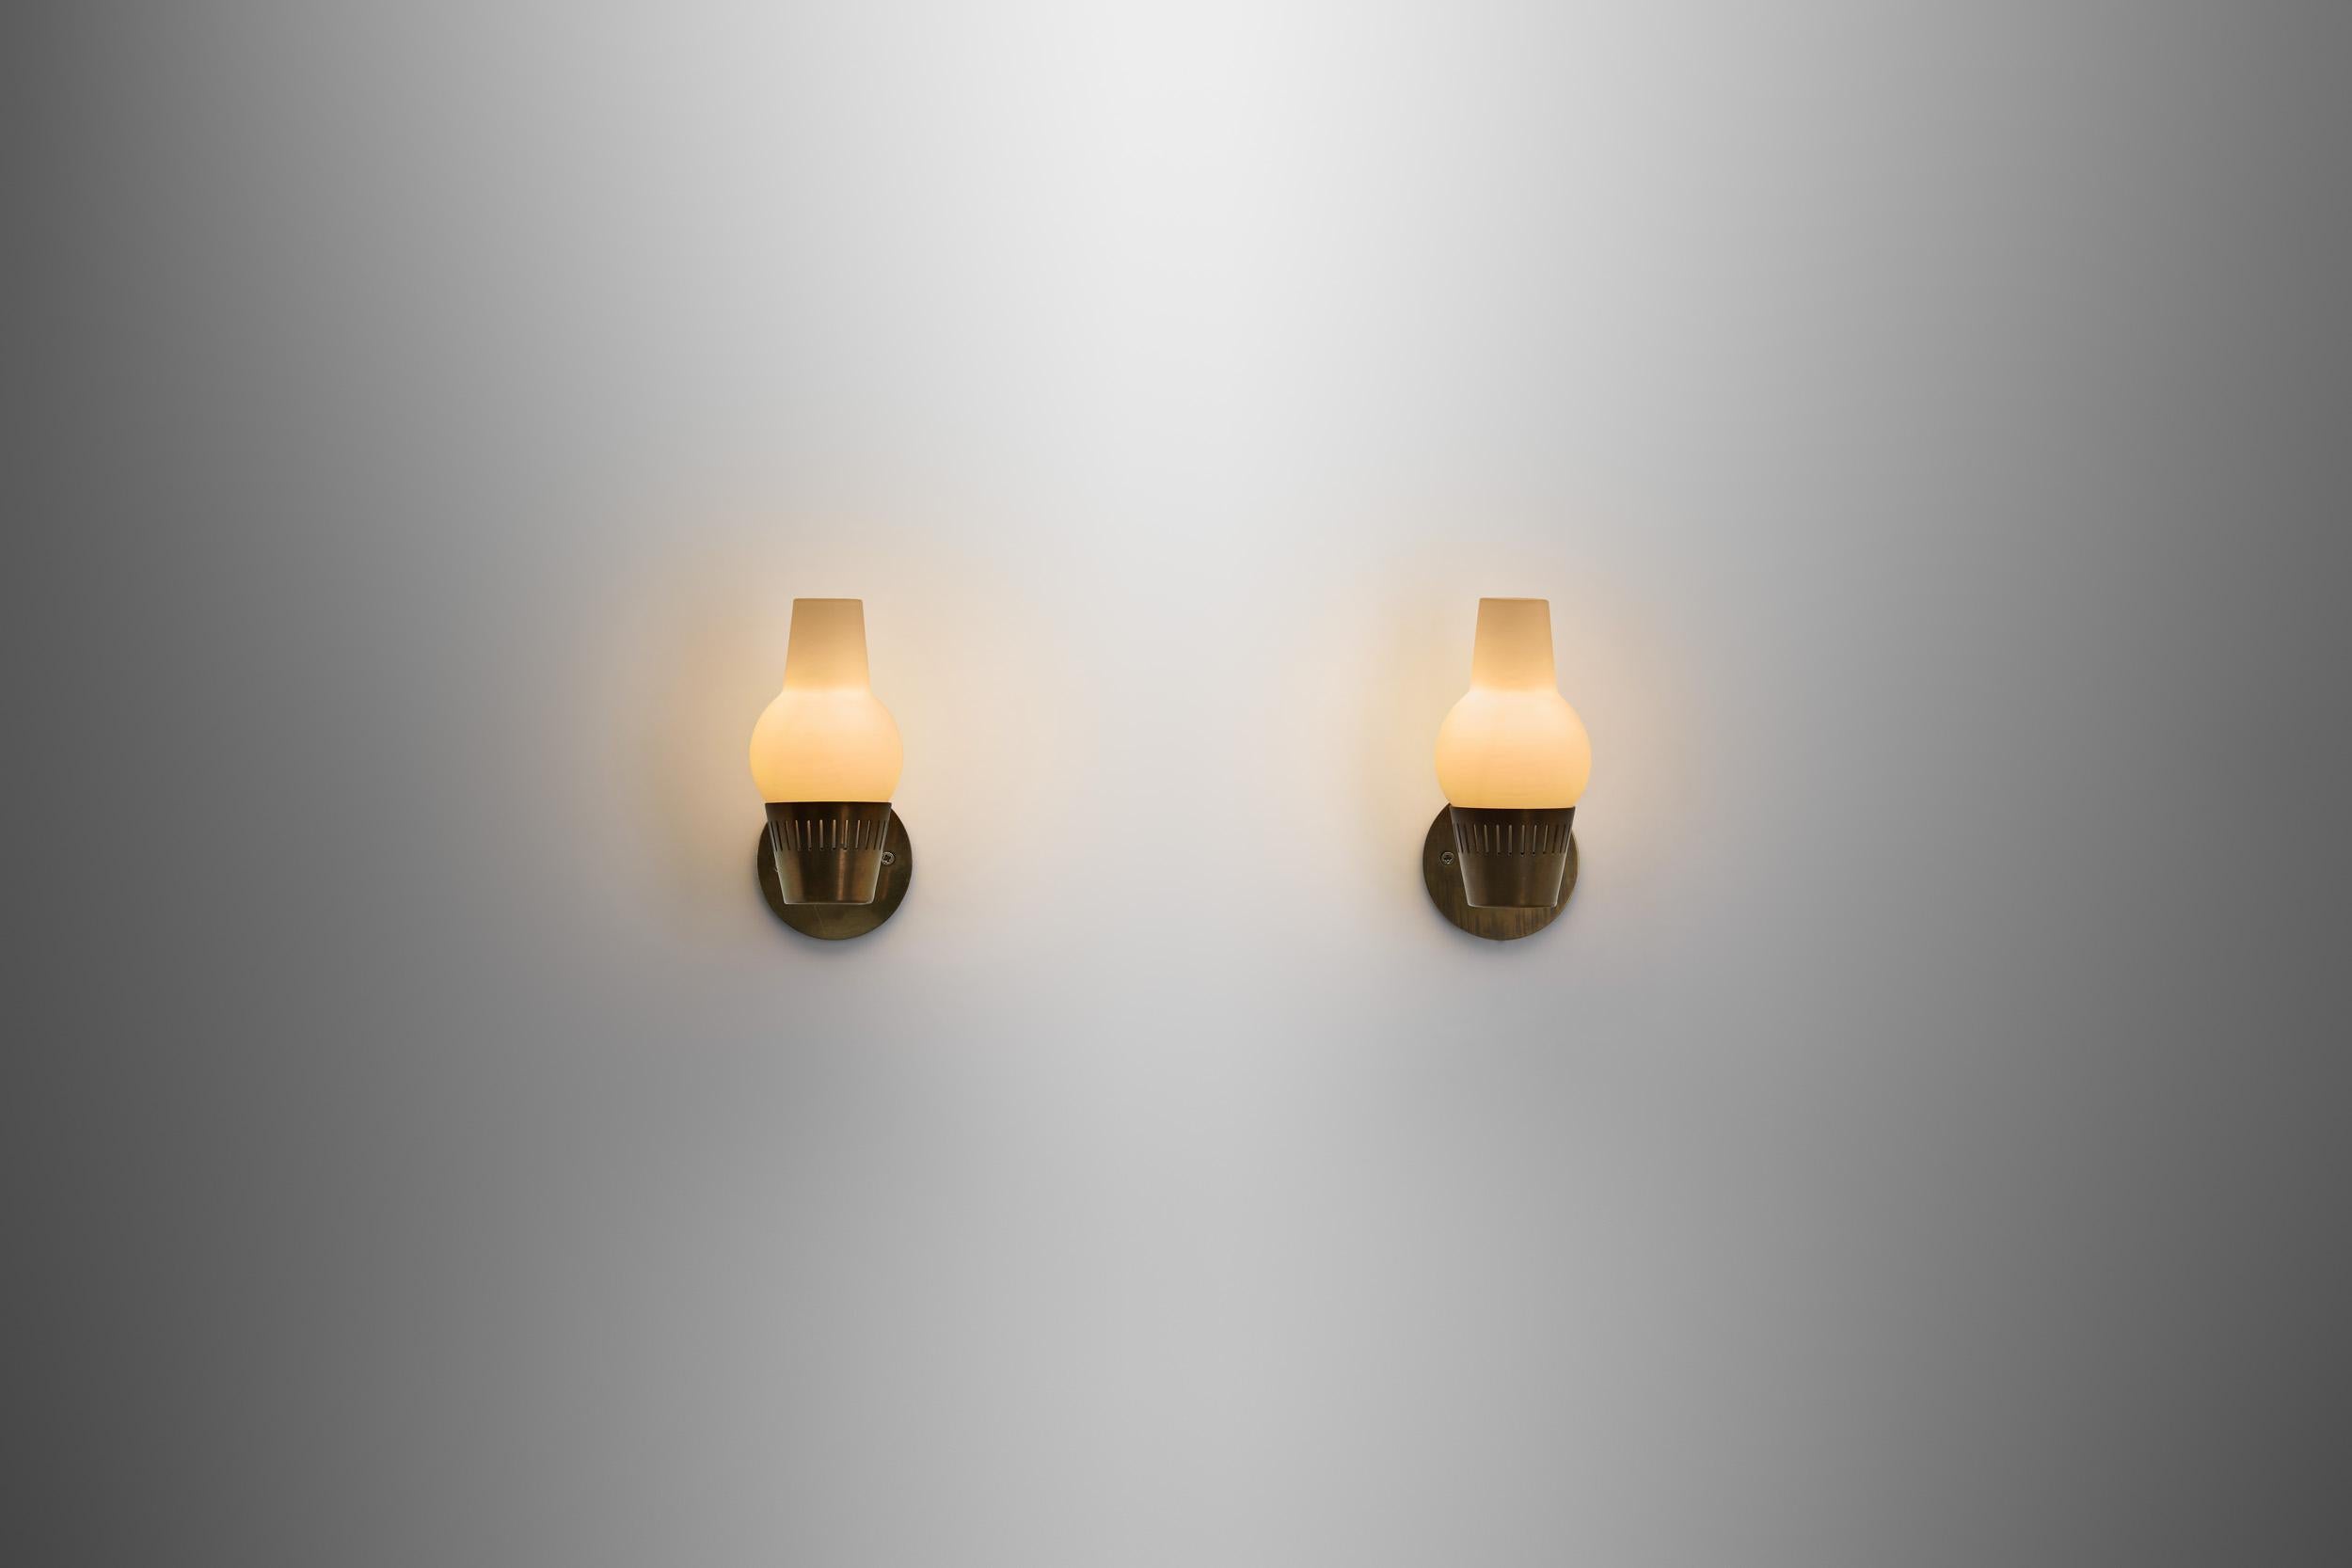 European Modern Brass and Opaque Matte Glass Wall Lamps, Europe 1960s For Sale 1